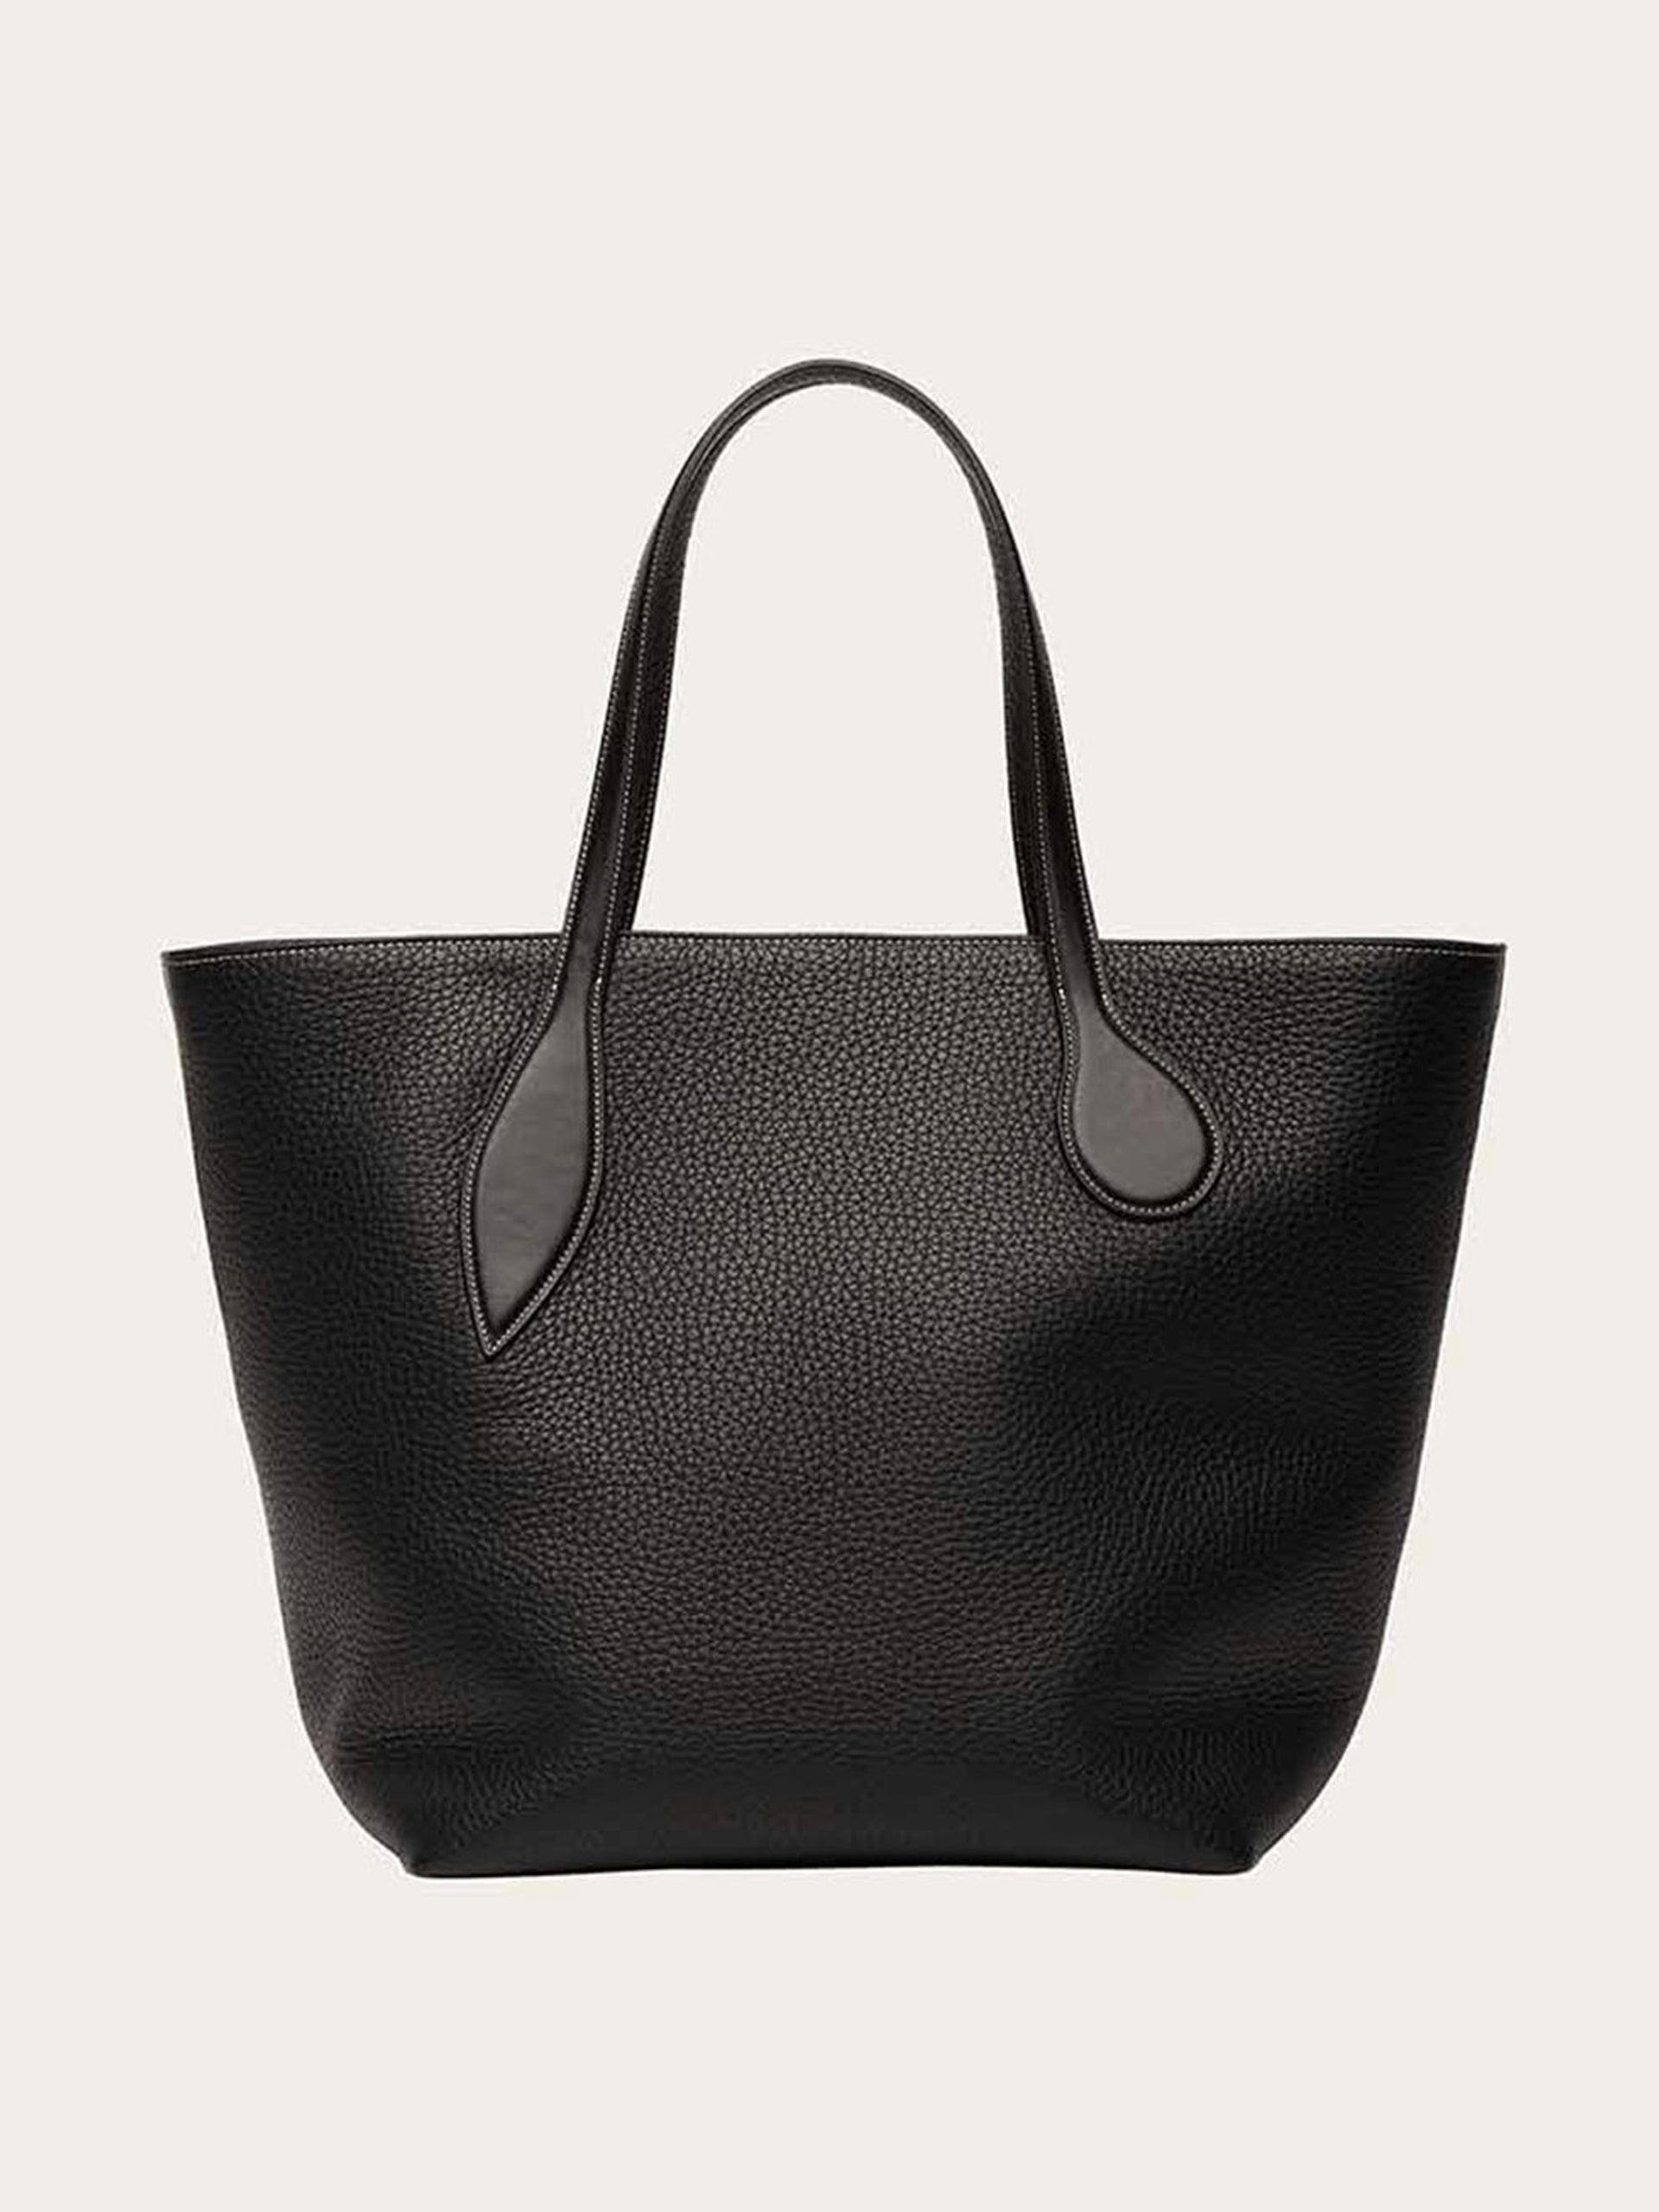 Black Sprout tote bag